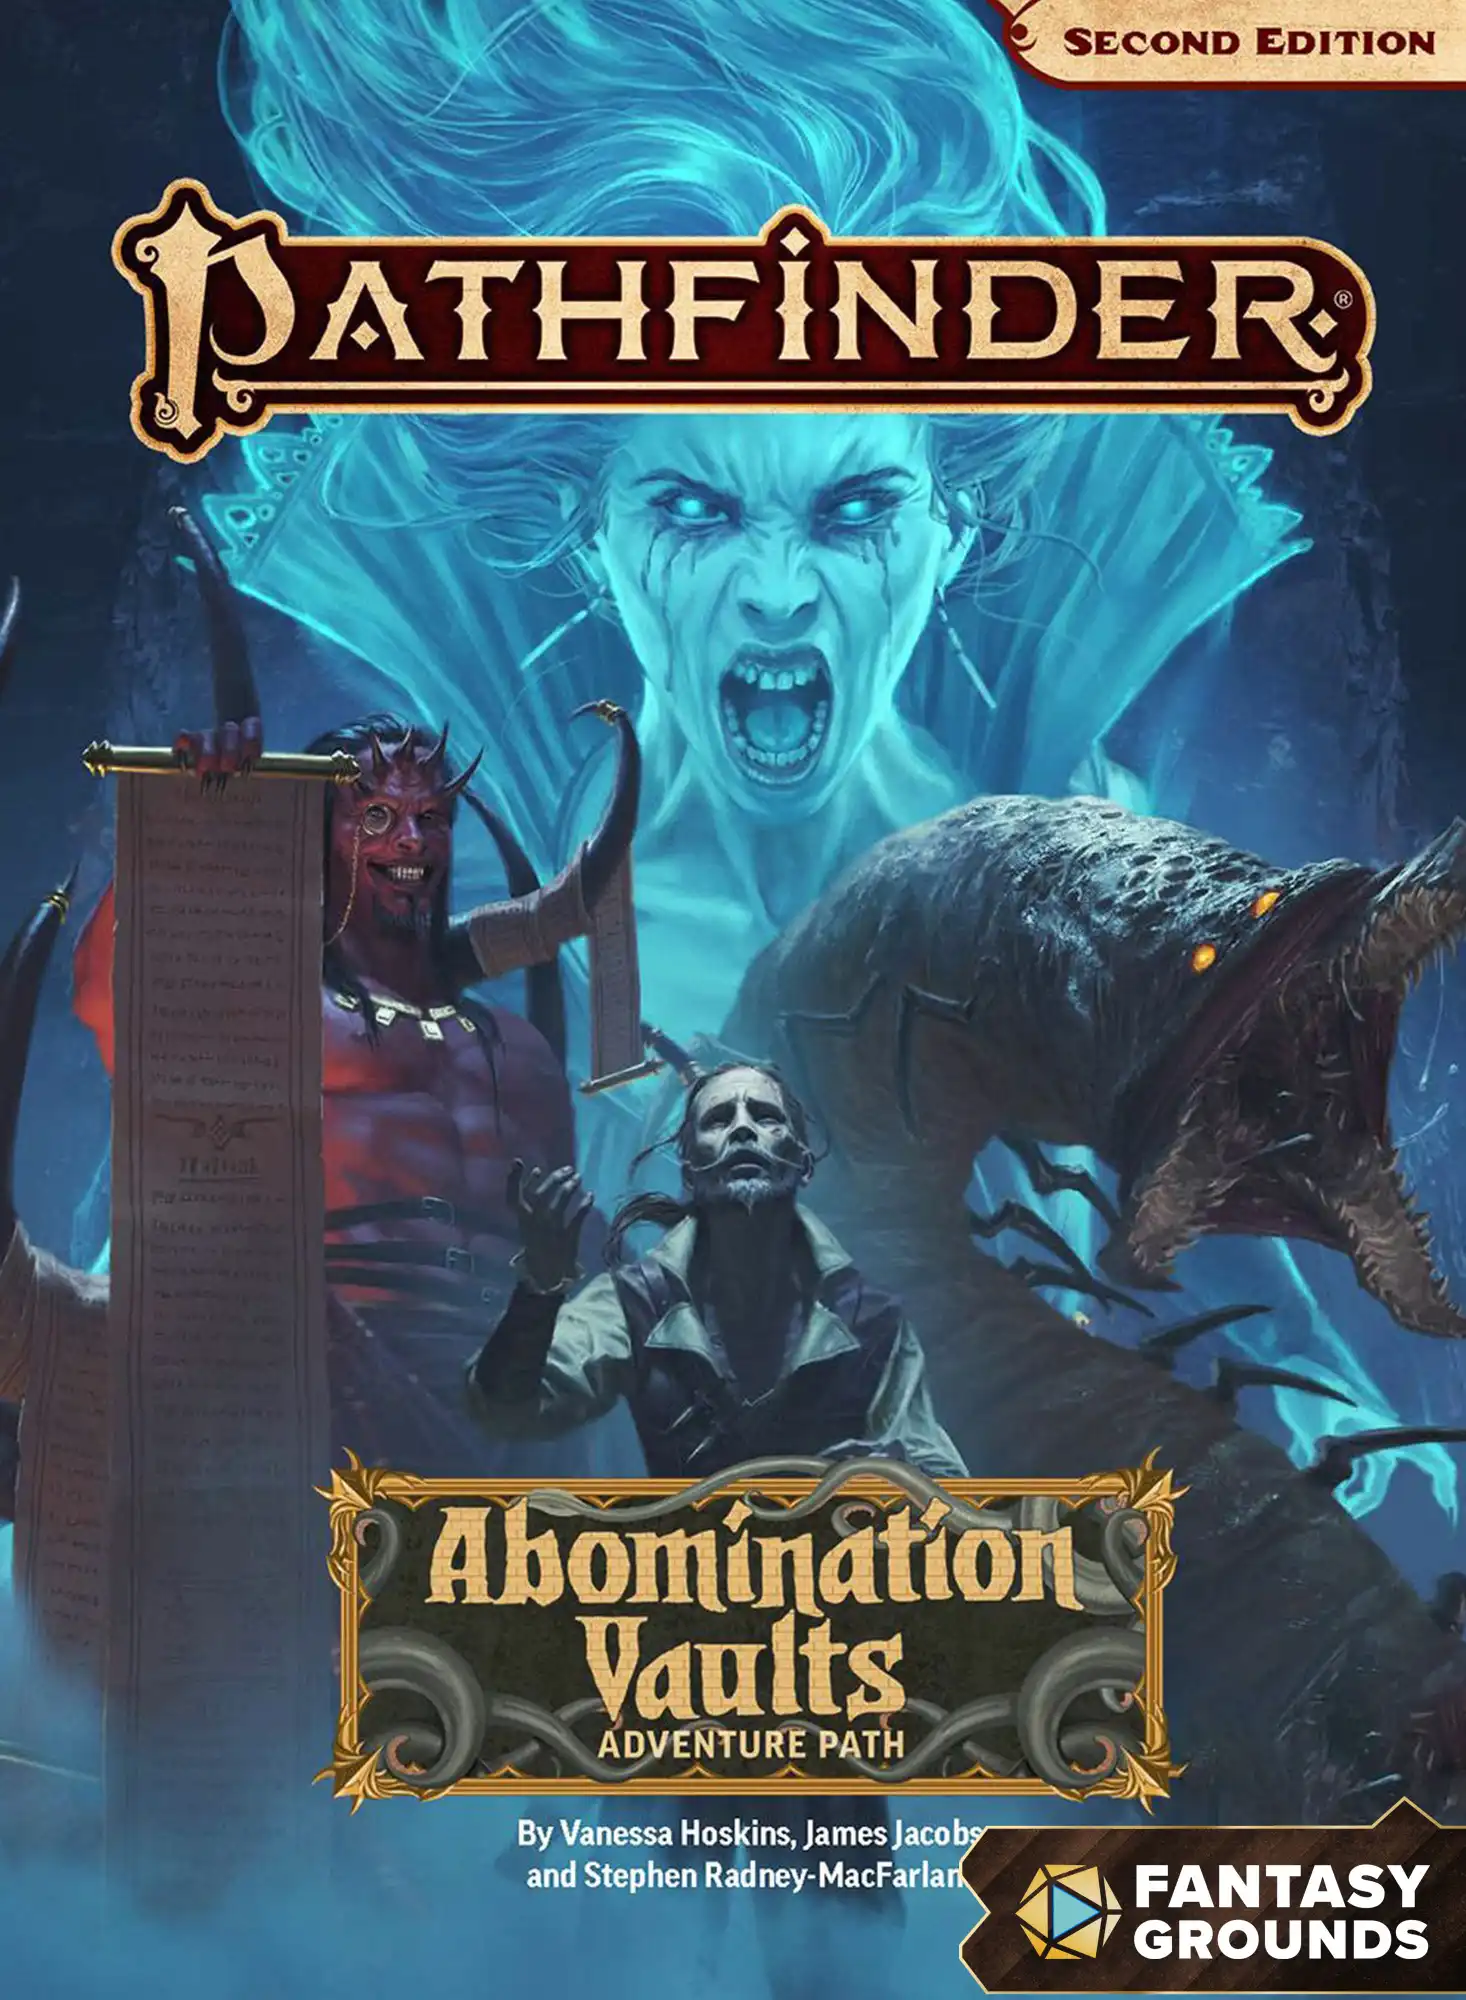 Age of Ashes: Hellknight Hill Is a Rich, Flexible Adventure for Pathfinder  2nd Edition